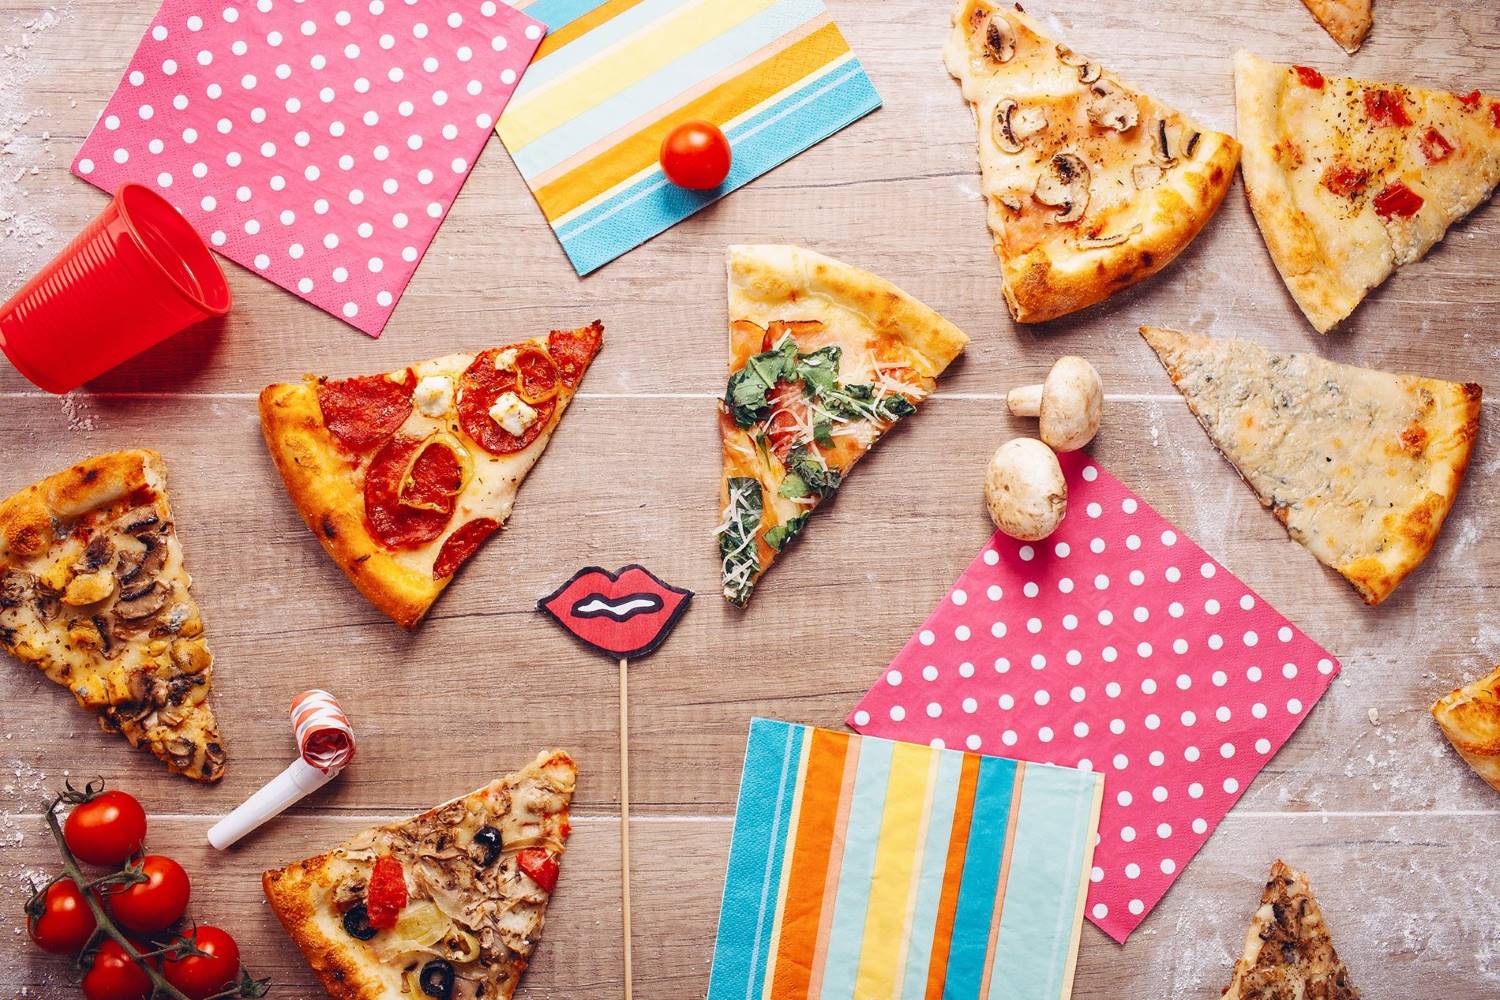 13-facts-about-national-pizza-party-day-may-17th